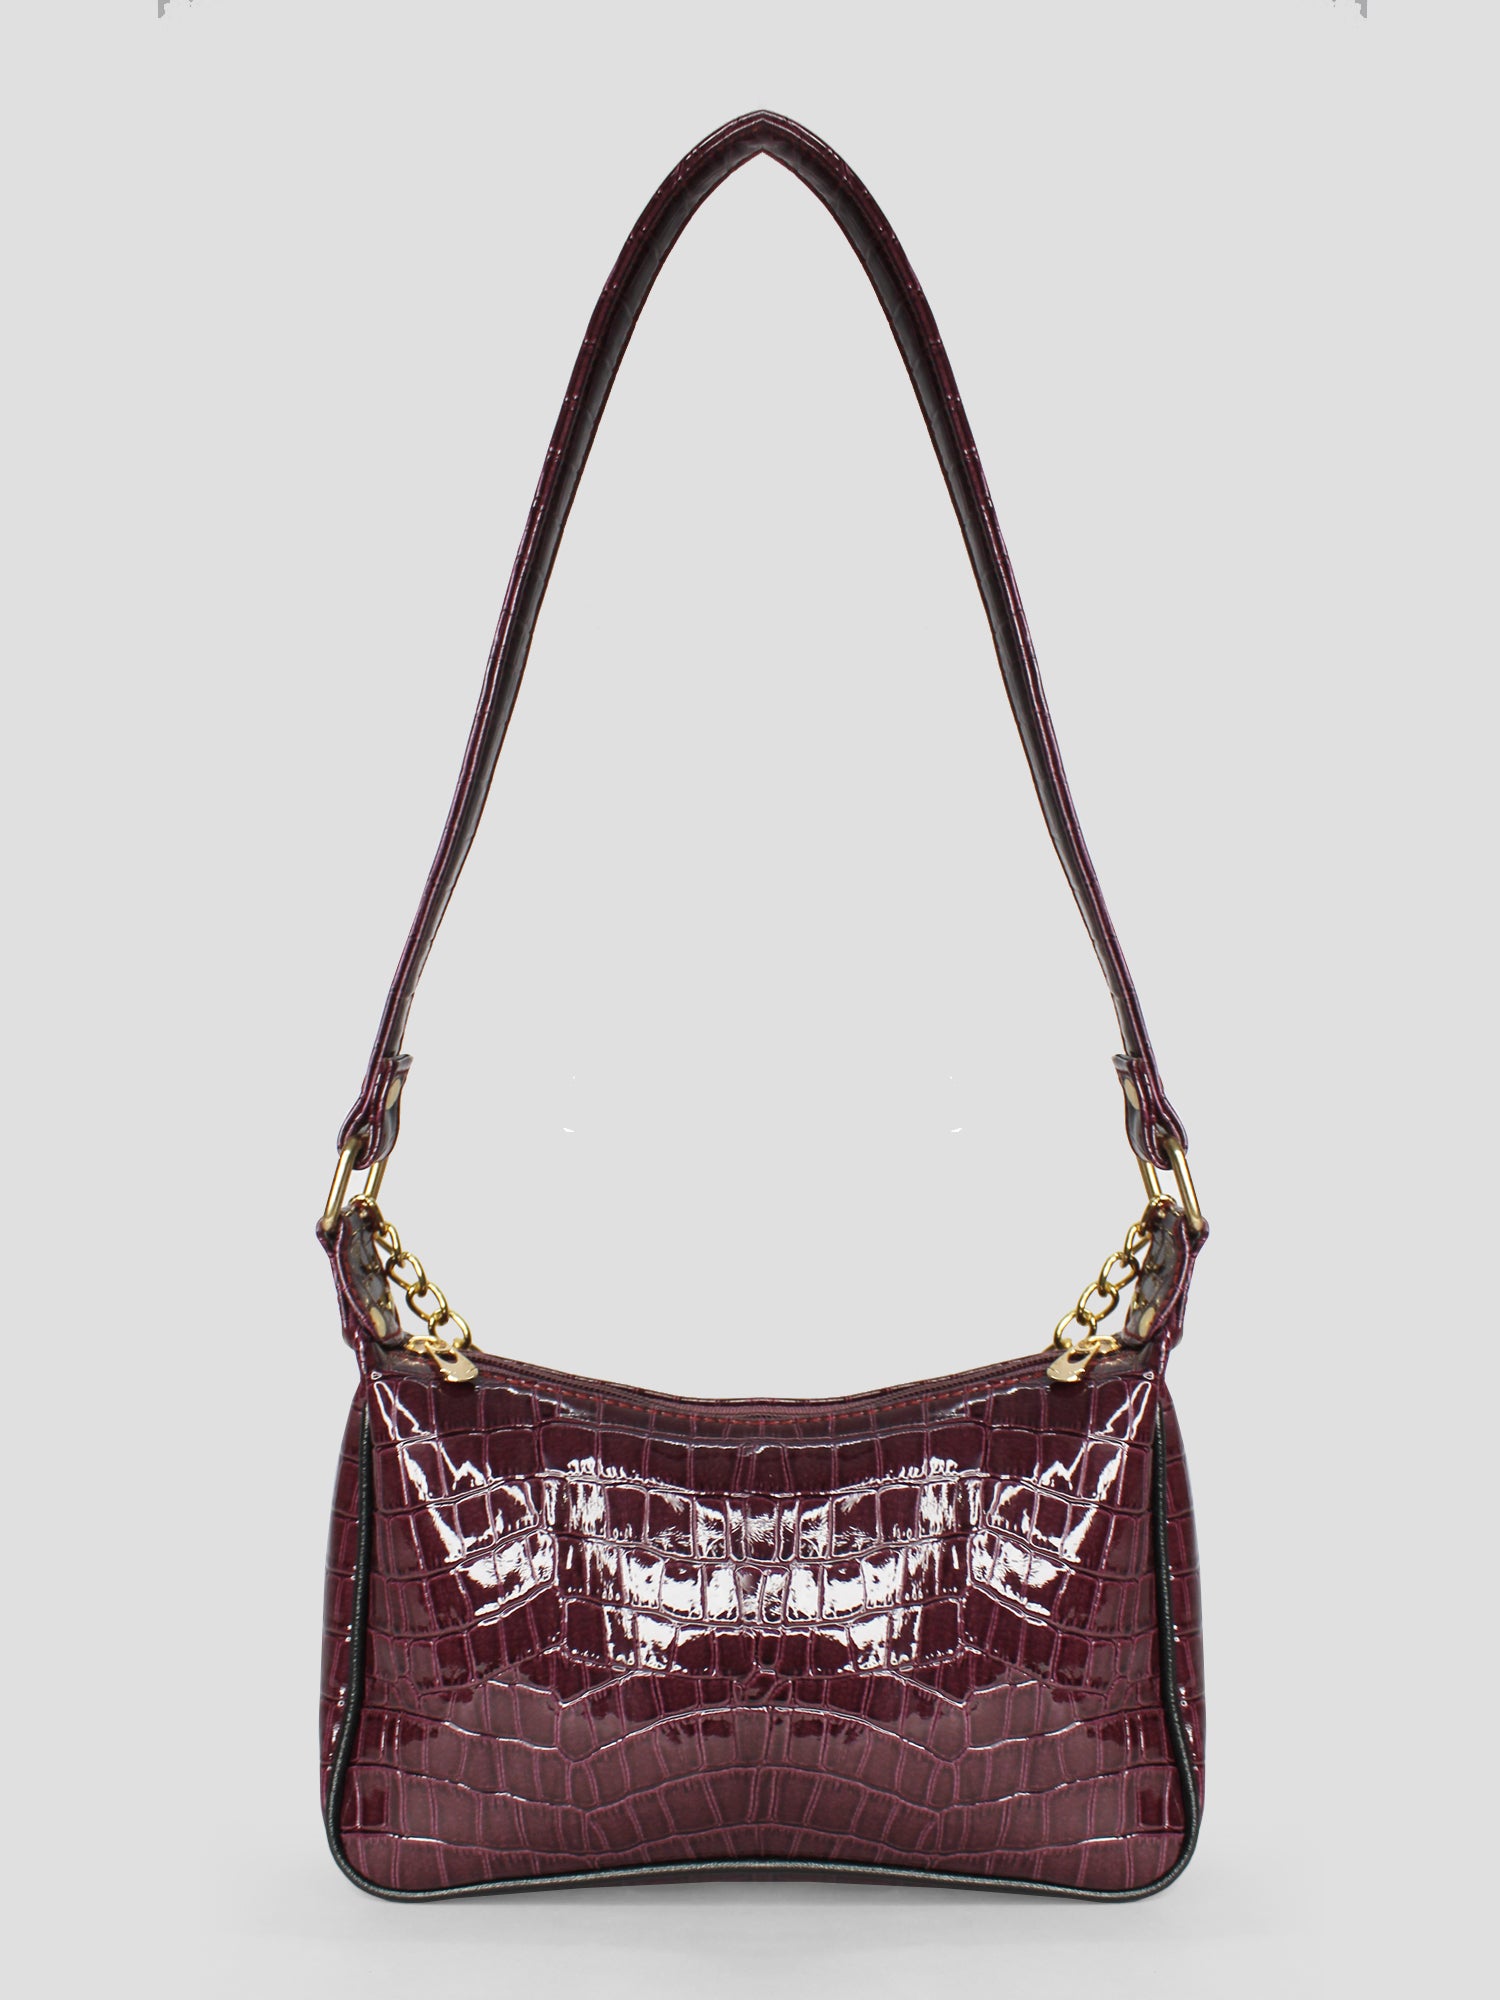 Buy Chunky Knit Bag Online In India - Etsy India